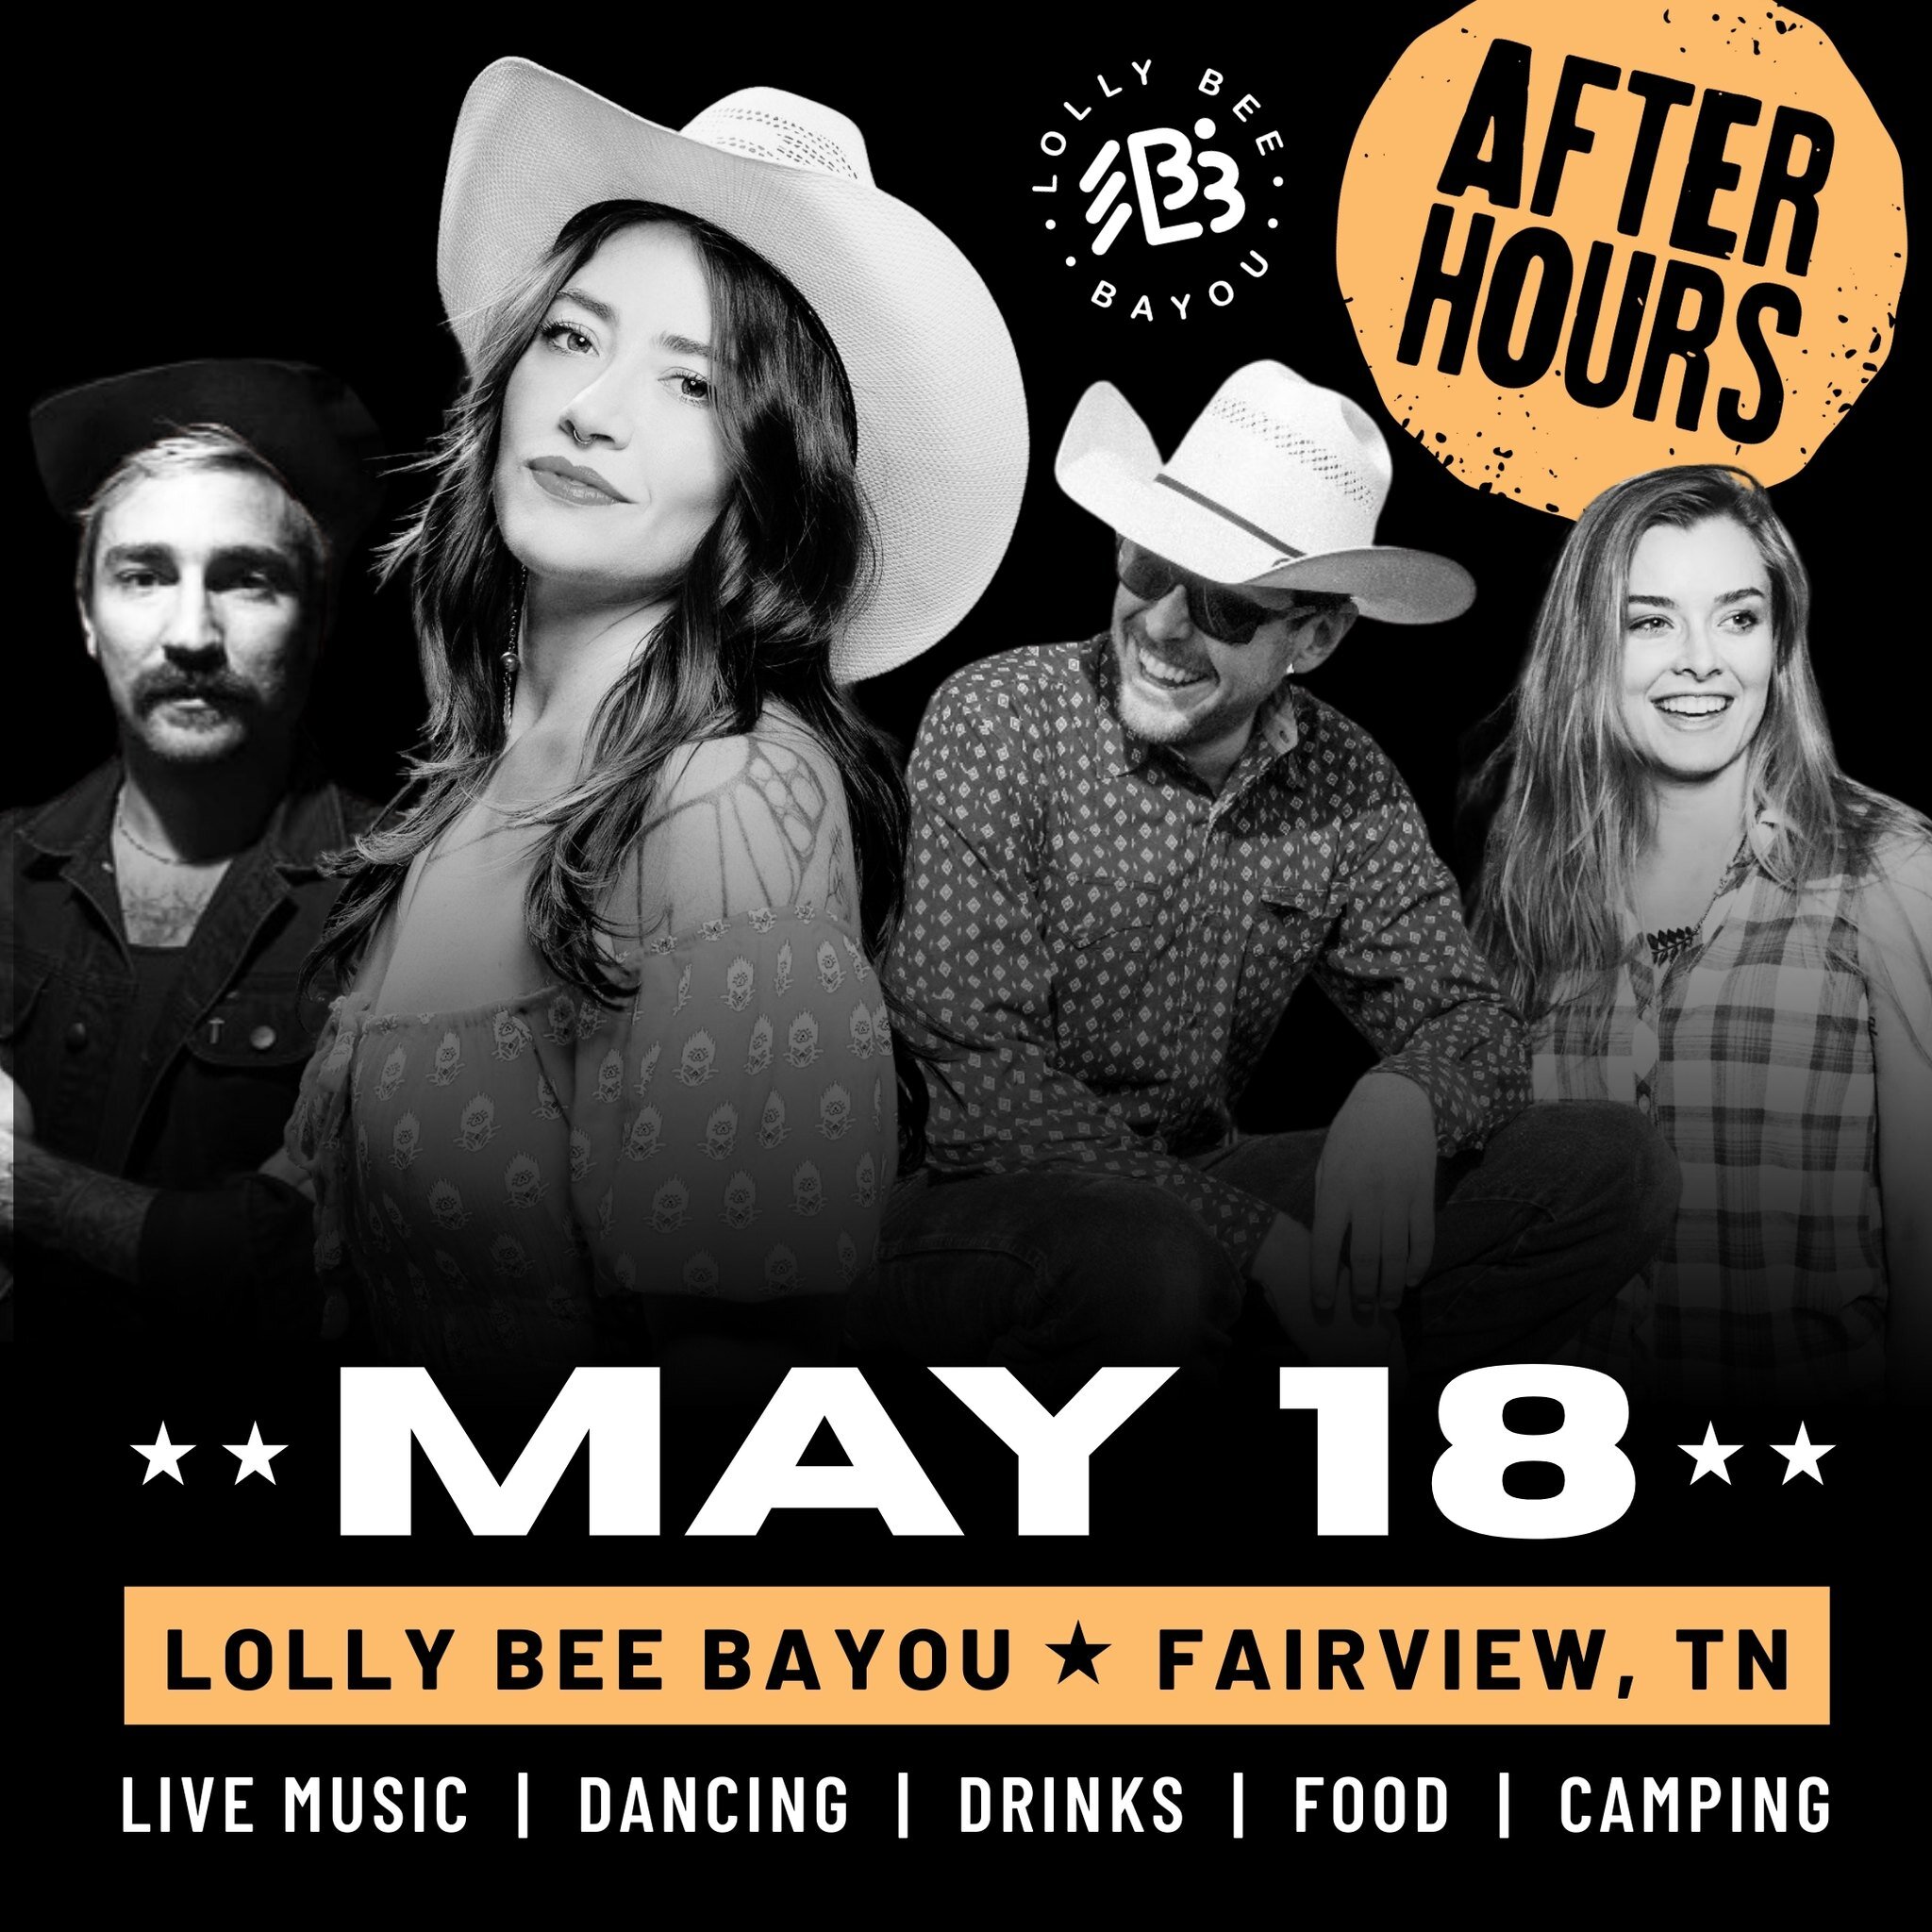 Bust out your boot scooter's out and get ready to dance on May 18 at After Hours @ Lolly Bee Bayou! 🌲⚡ Bring your friends, your lovers, your strangers and your neighbors for a night of fun in the barnyard. Lets make some more memories in these pines